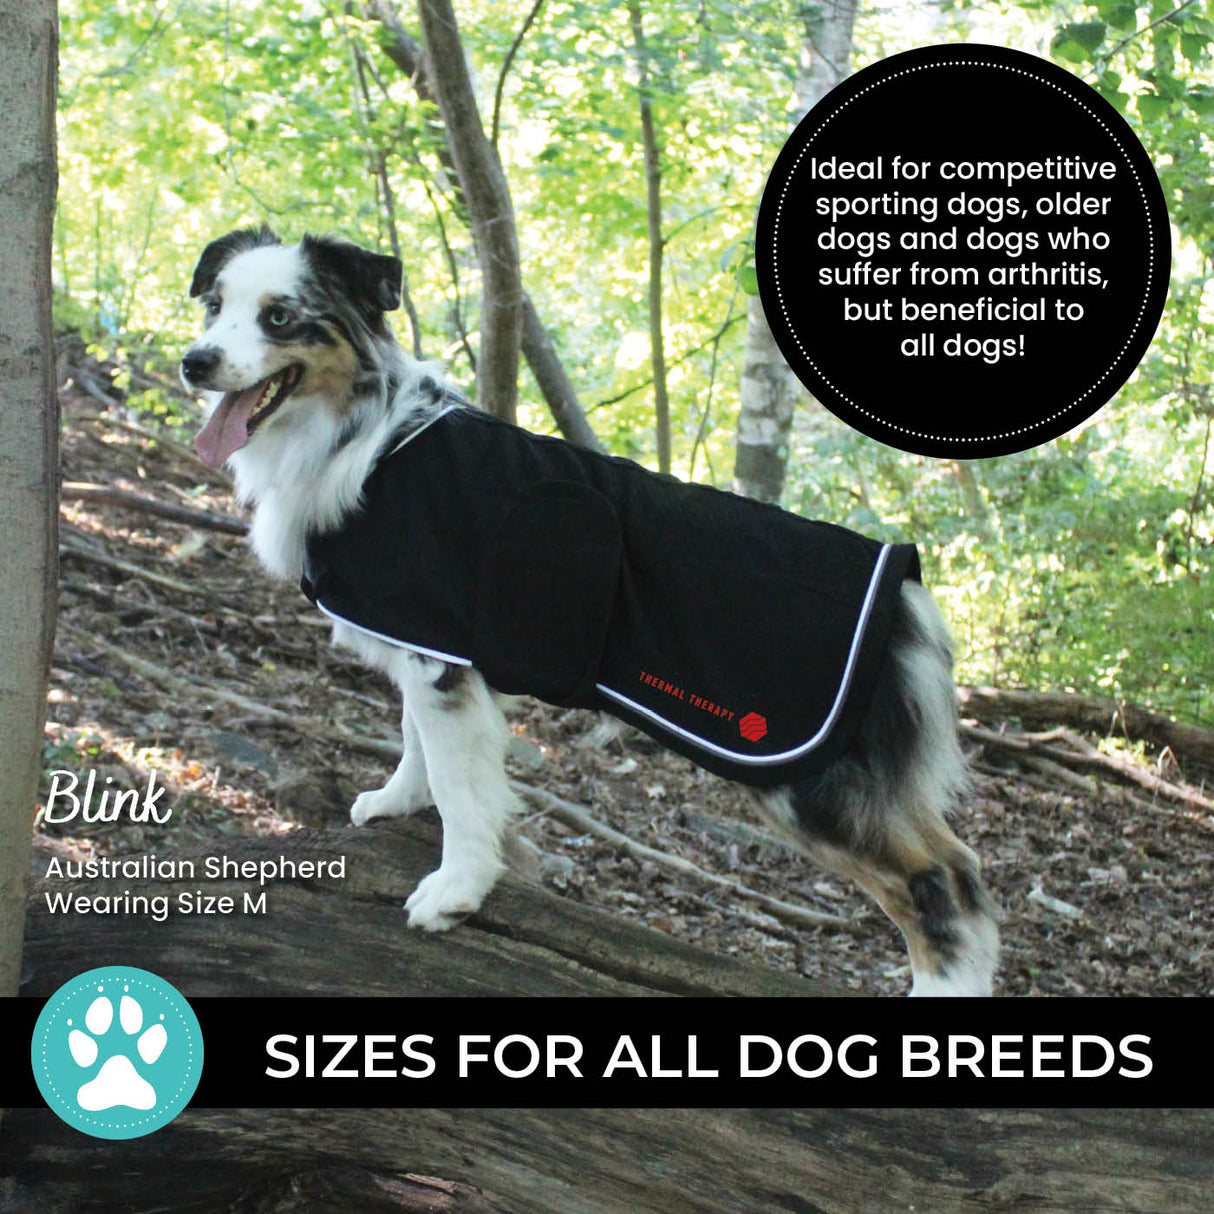 Thermal Therapy Mesh Dog Coat